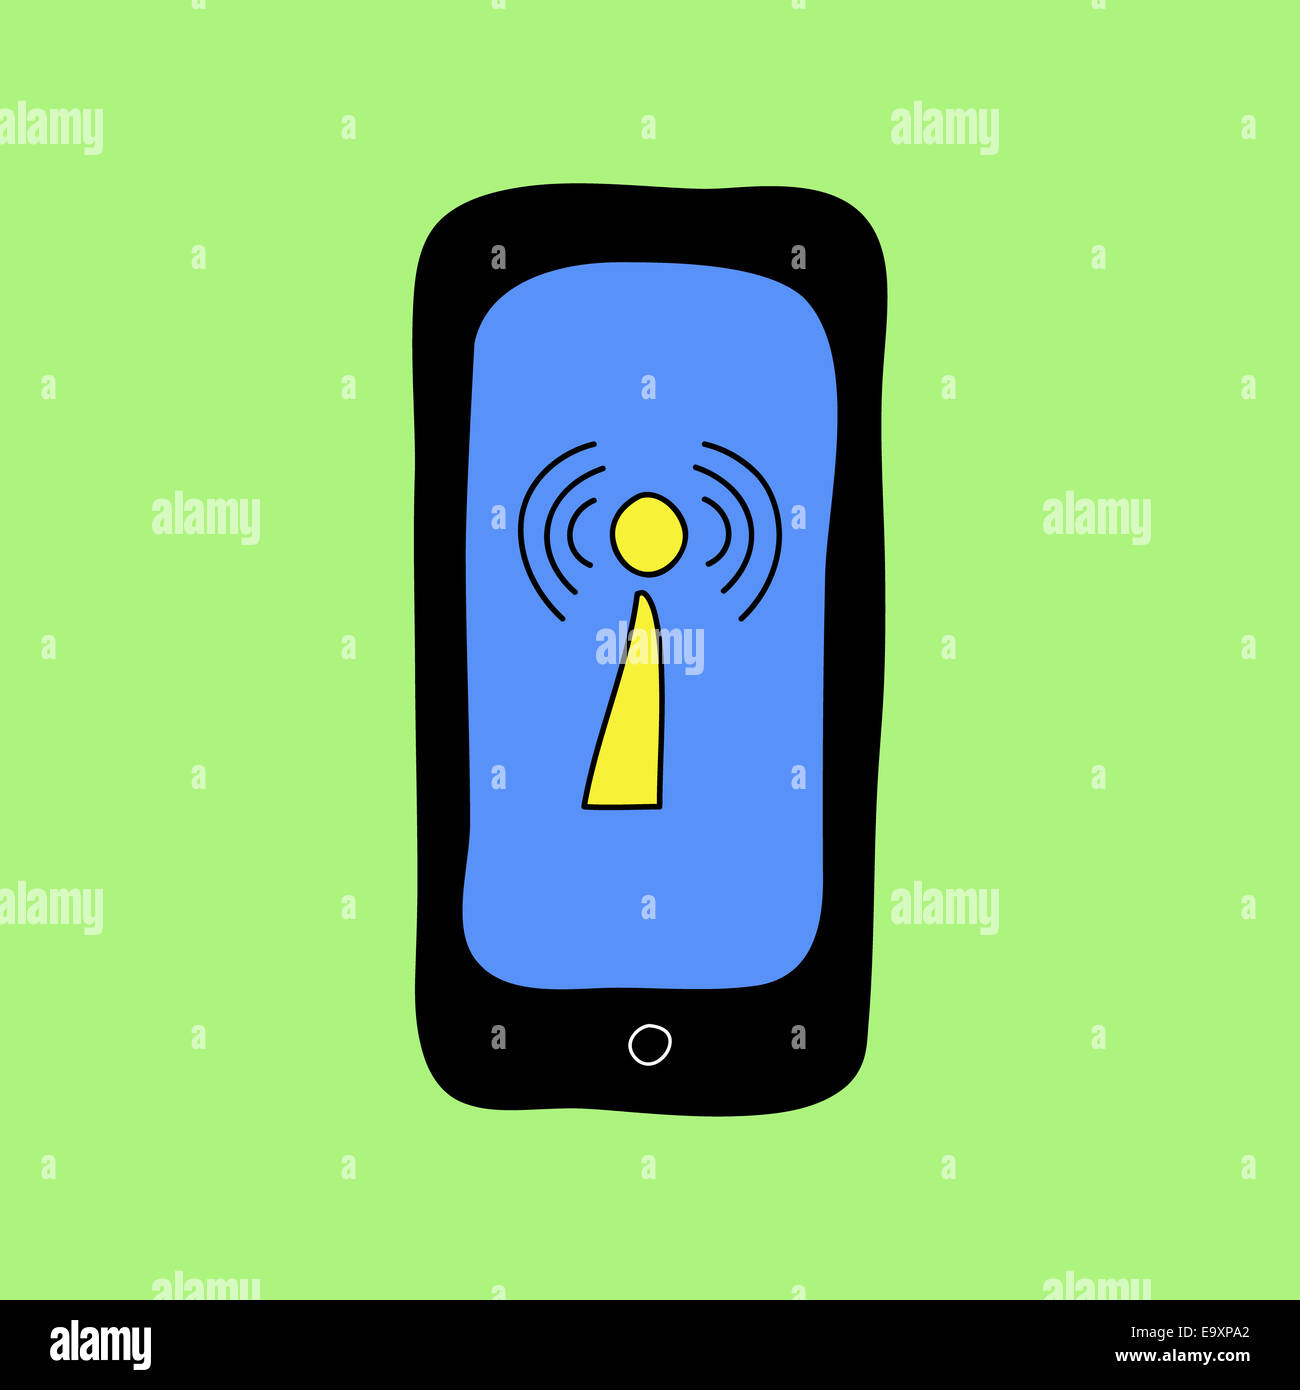 Doodle style phone with wi-fi sign Stock Photo